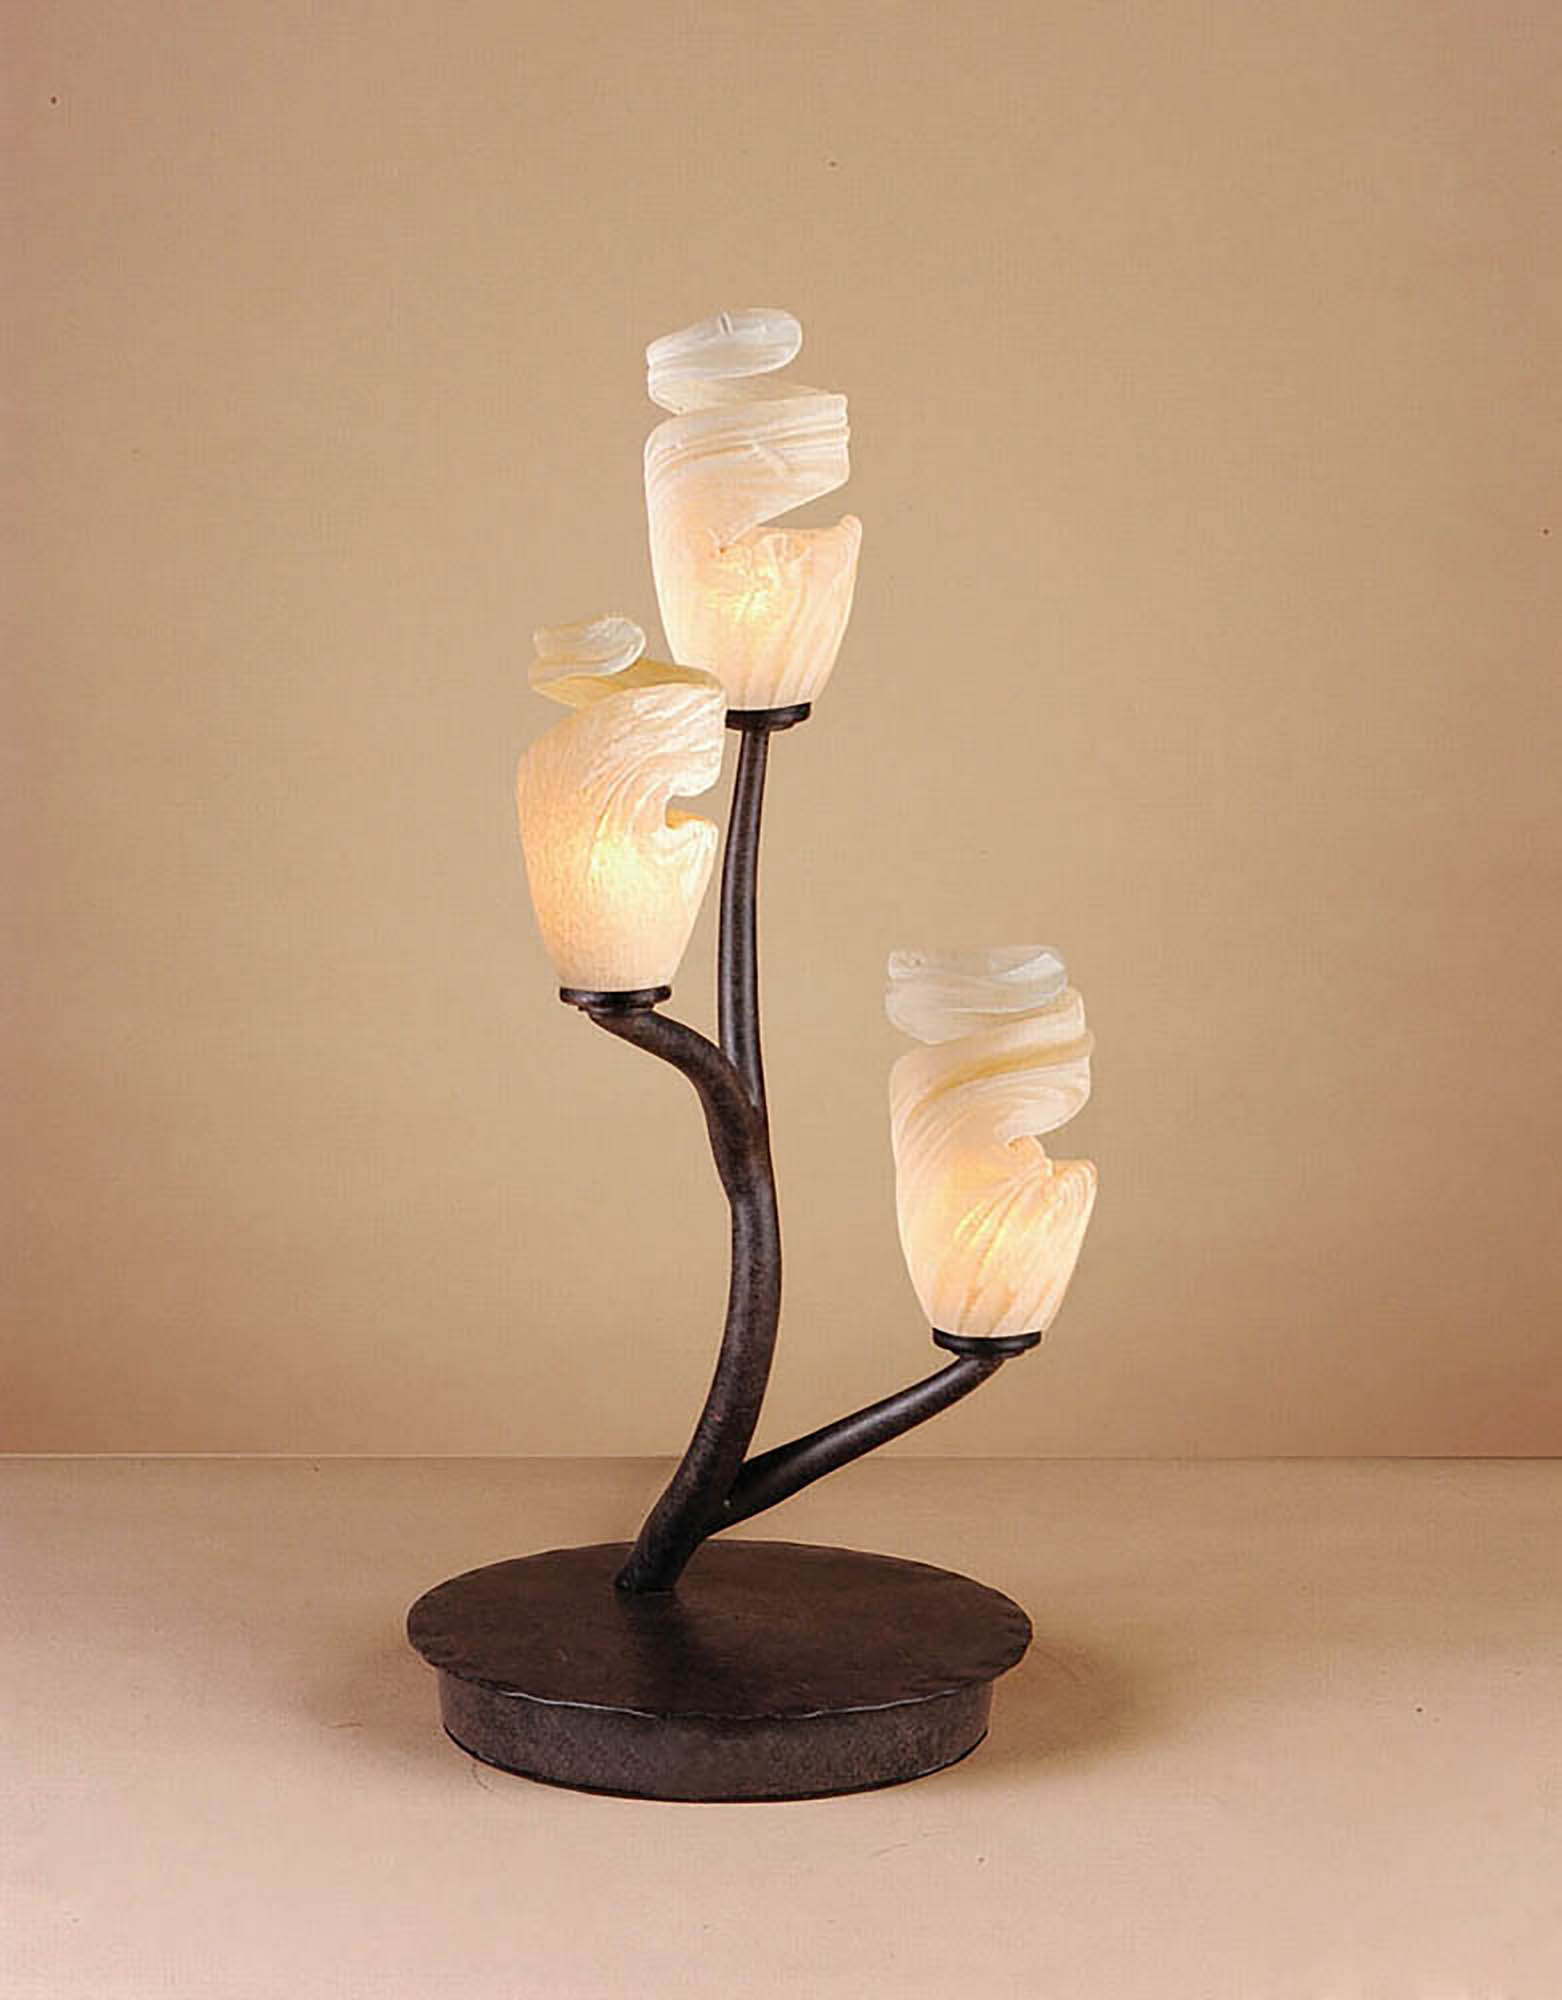 Forest Table Lamps Mantra Traditional Table Lamps